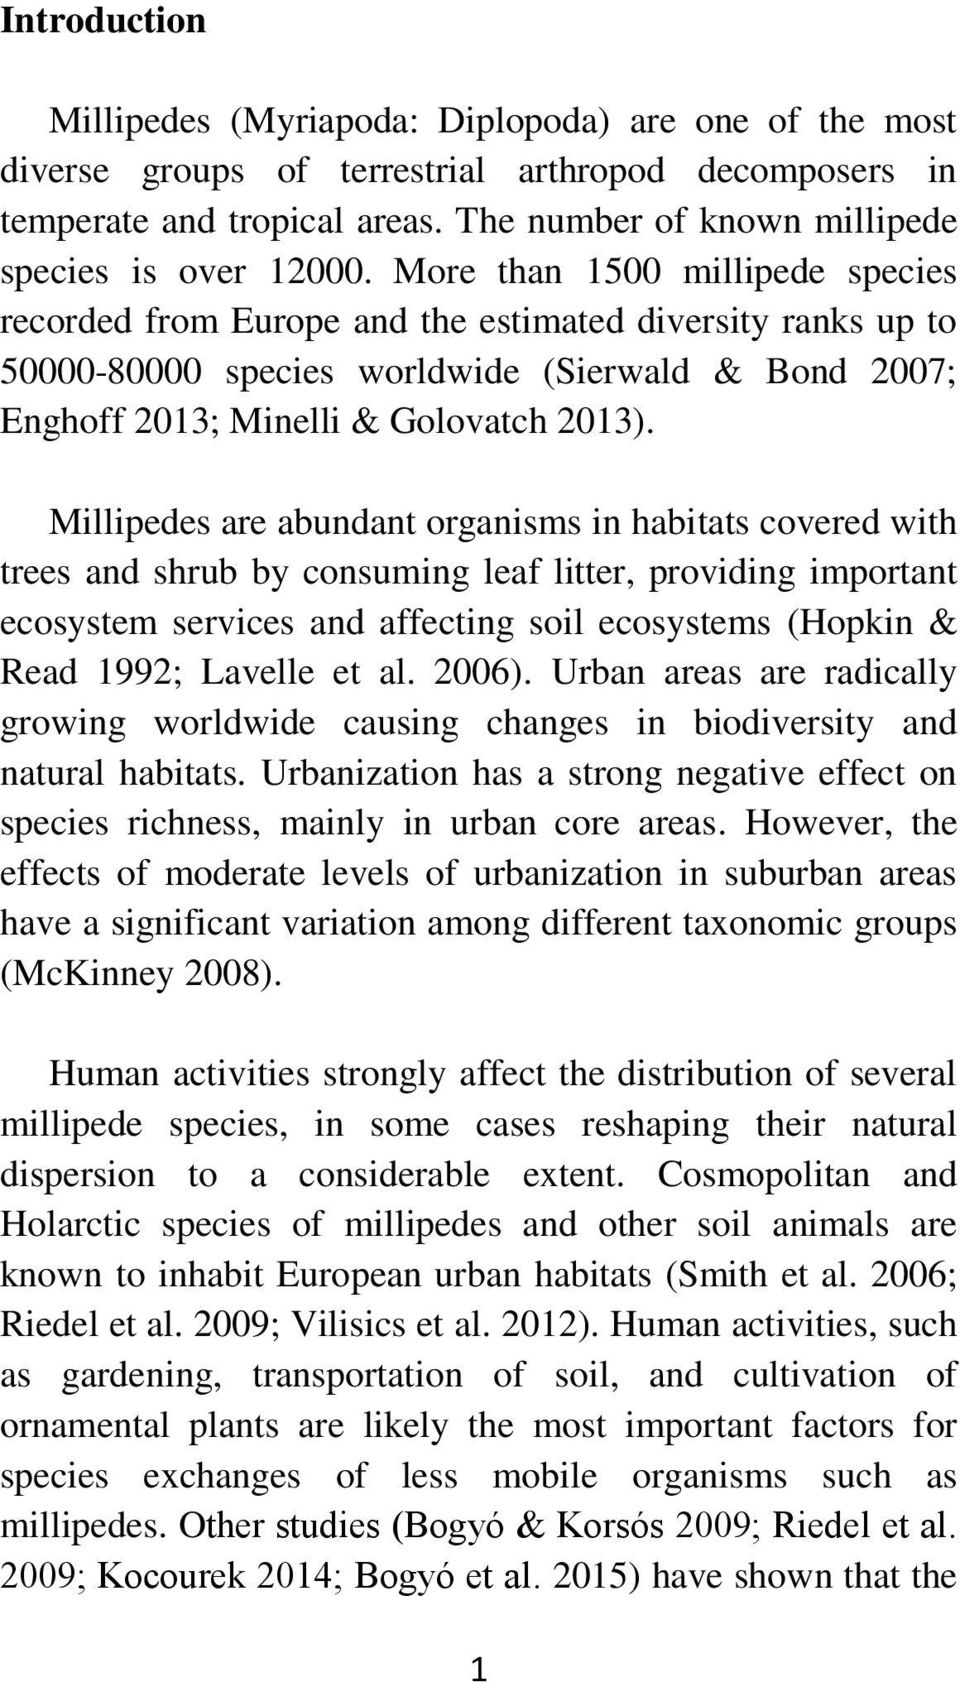 More than 1500 millipede species recorded from Europe and the estimated diversity ranks up to 50000-80000 species worldwide (Sierwald & Bond 2007; Enghoff 2013; Minelli & Golovatch 2013).